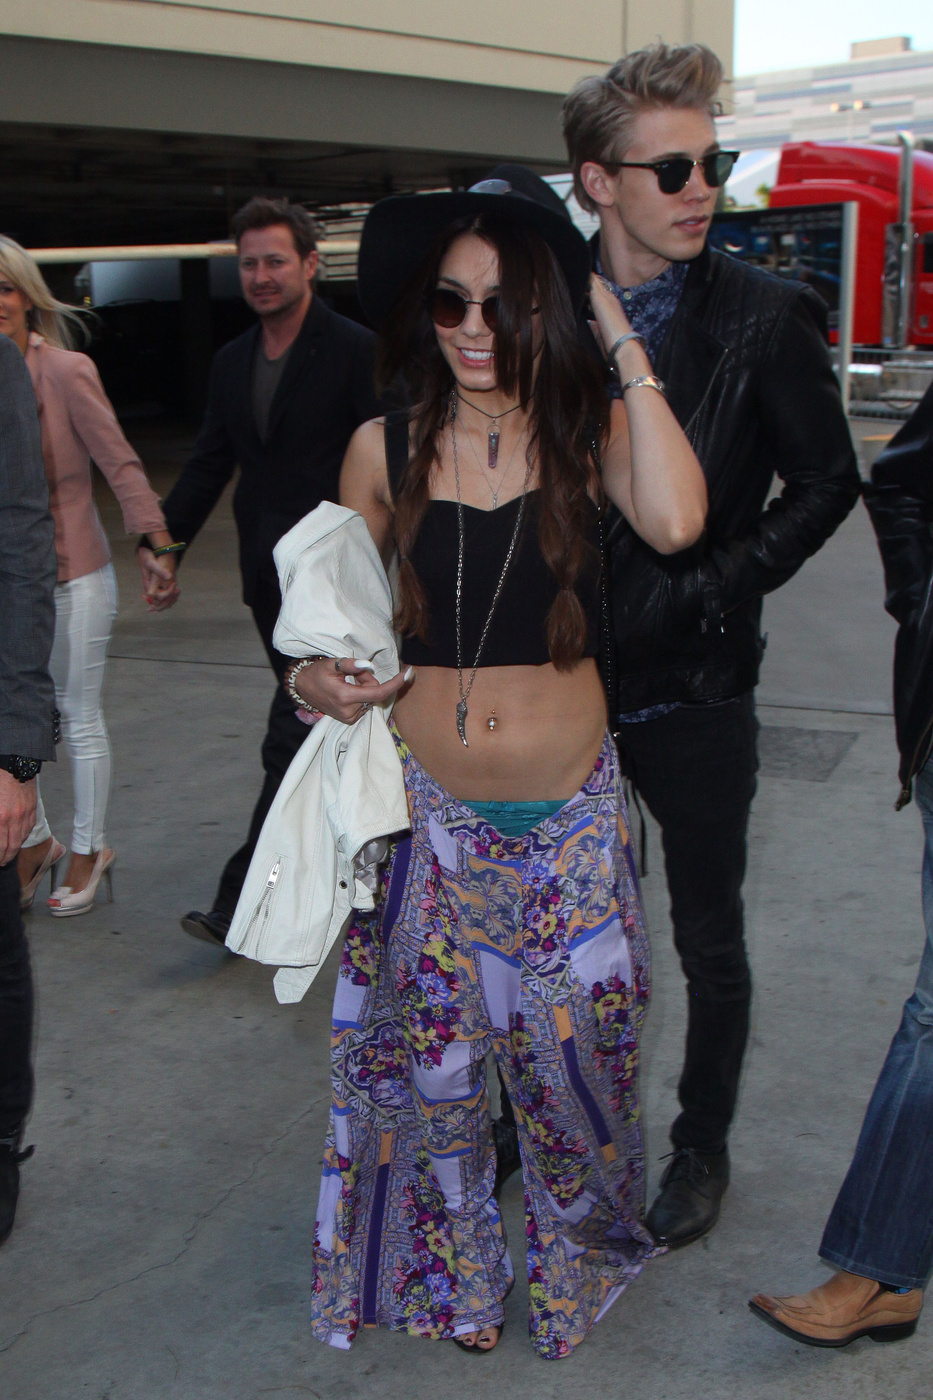 Vanessa Hudgens suffers a wardrobe malfunction as she arrives at the Rolling Stones concert with Austin Butler at the Staples Center in Los Angeles